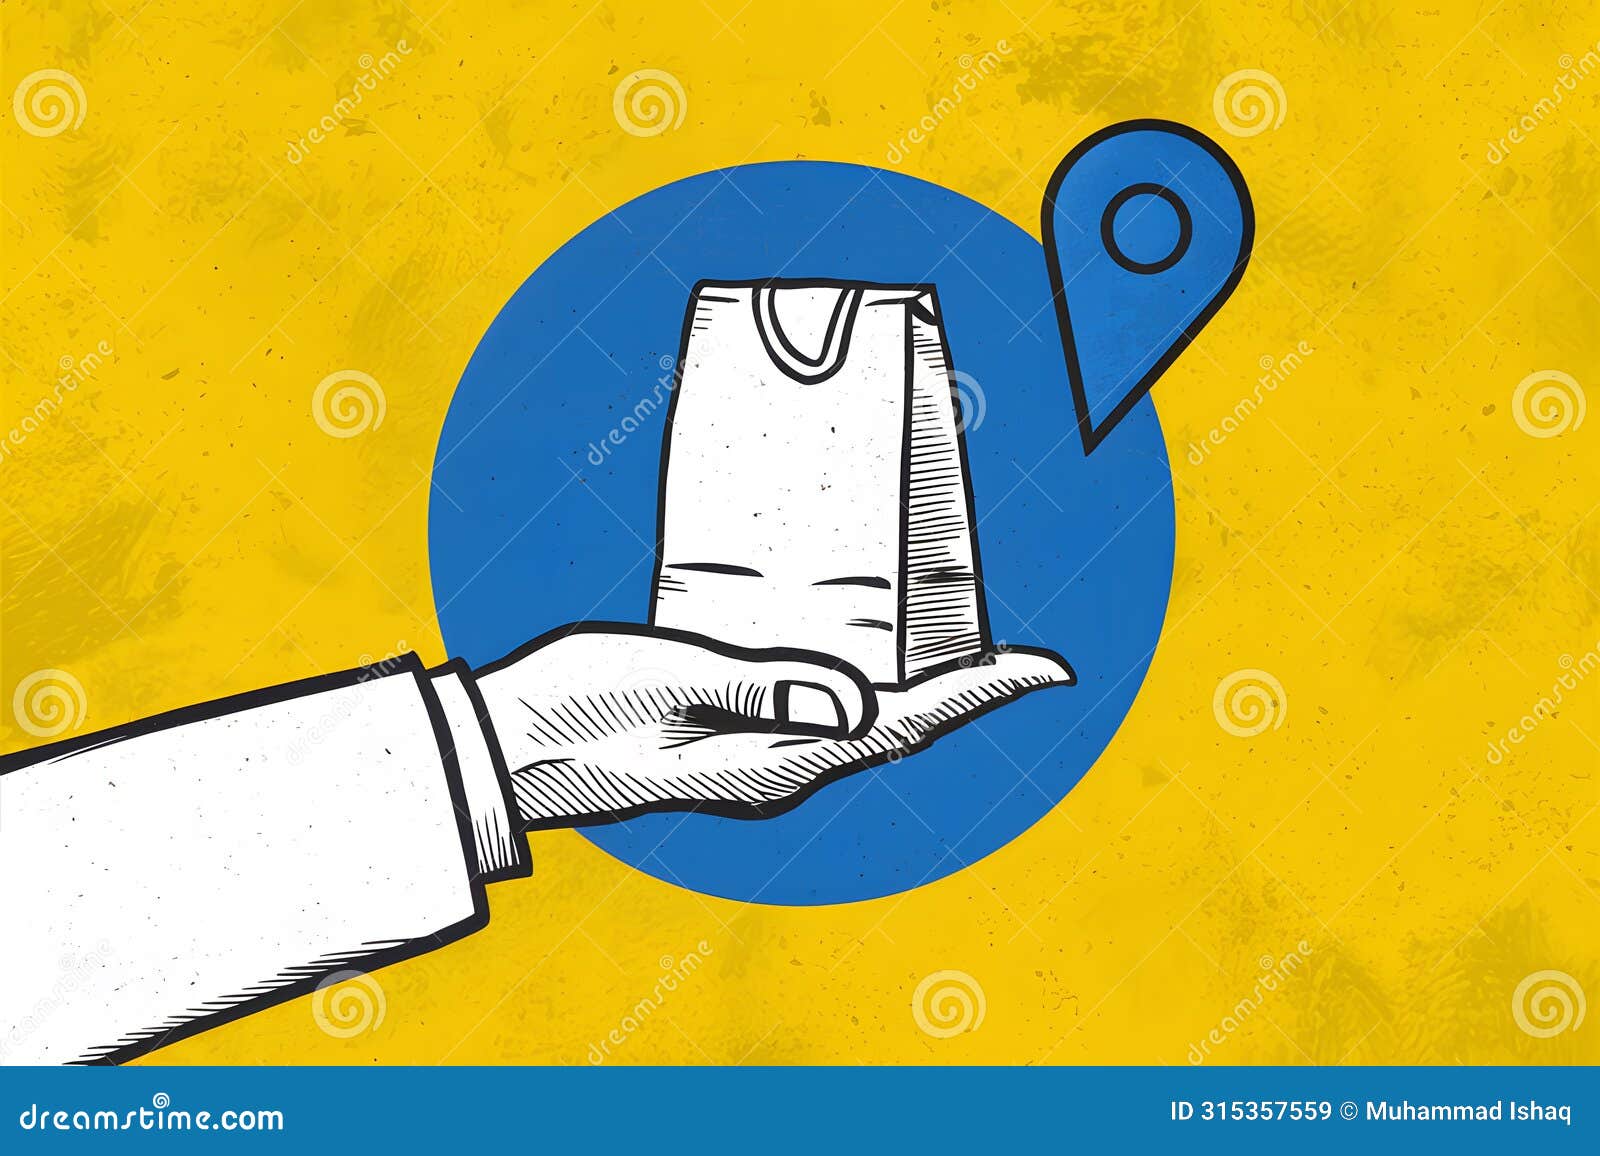 efficient delivery or pickup scenario illustrated with hand and paper bag on pin